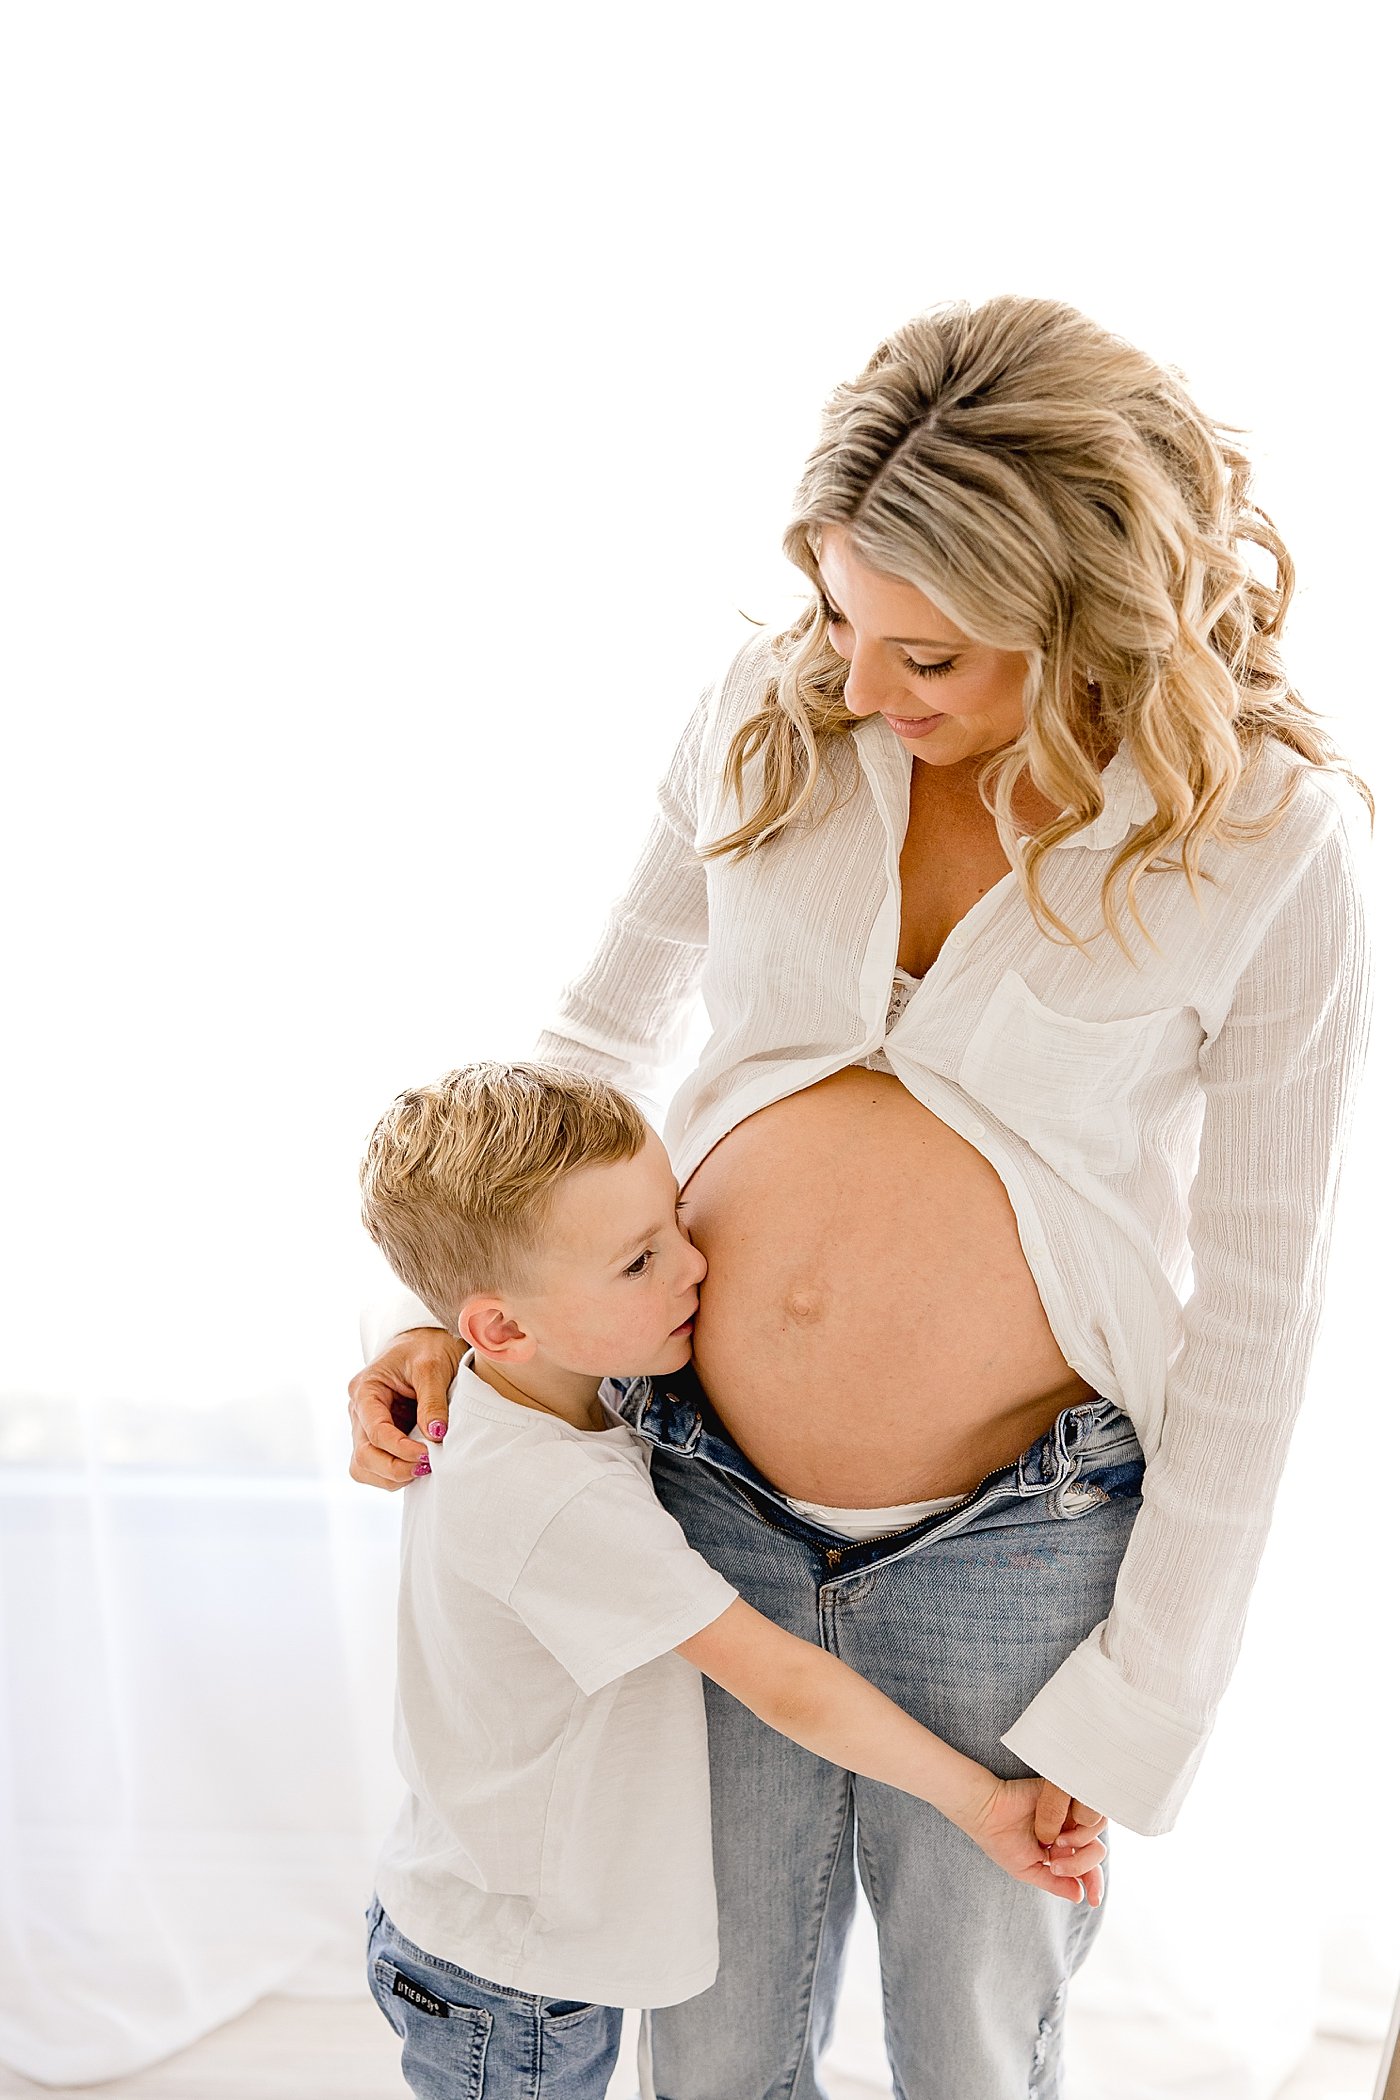 Newport Beach studio maternity session with Ambre Williams Photography